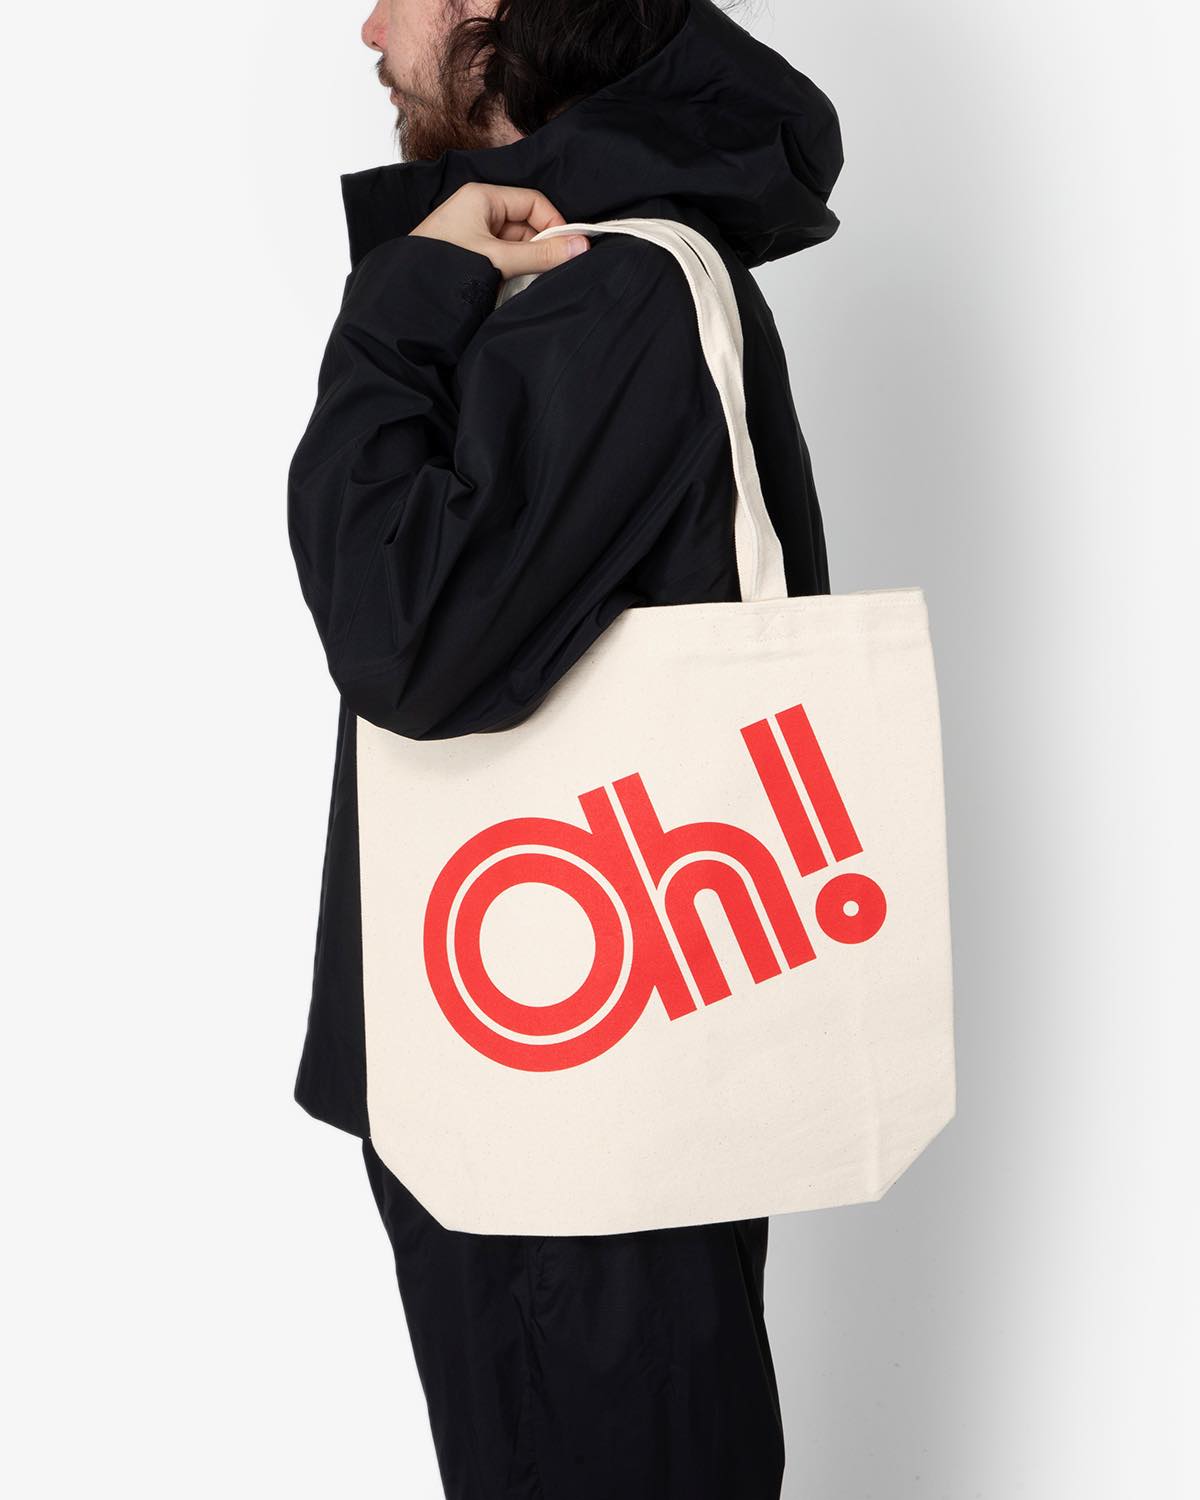 PRINTED GRAPHIC TOTE M "Oh!"